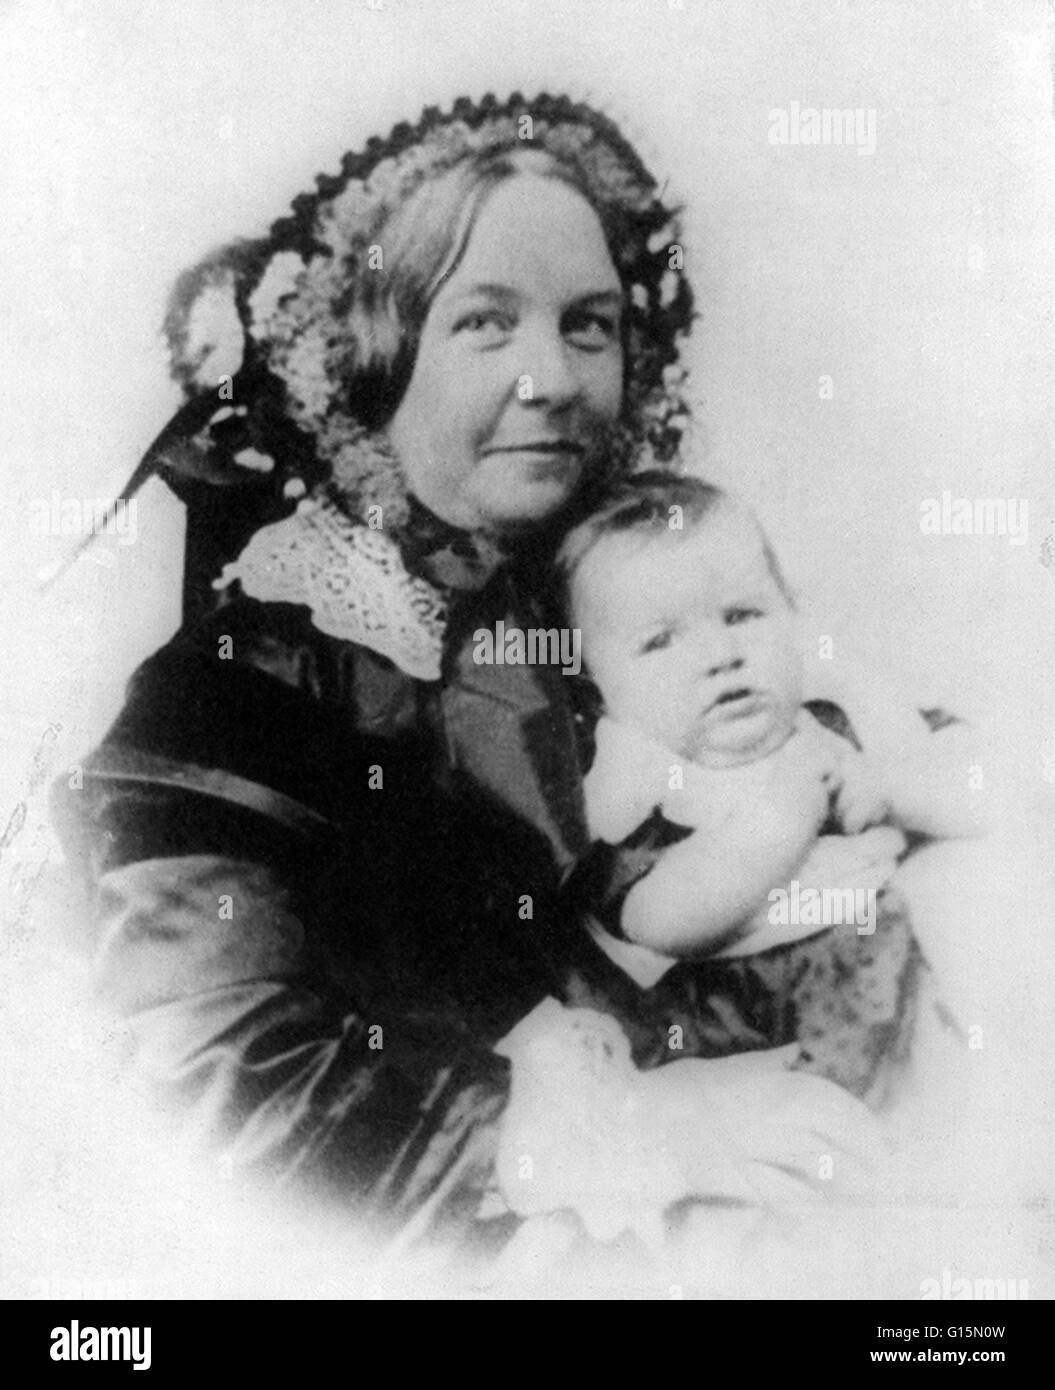 Elizabeth Cady Stanton and her daughter, Harriot from a daguerreotype, 1856. Elizabeth Cady Stanton (November 12, 1815 - October 26, 1902) was an American social activist, abolitionist, and leading figure of the early woman's movement. Unlike many women o Stock Photo